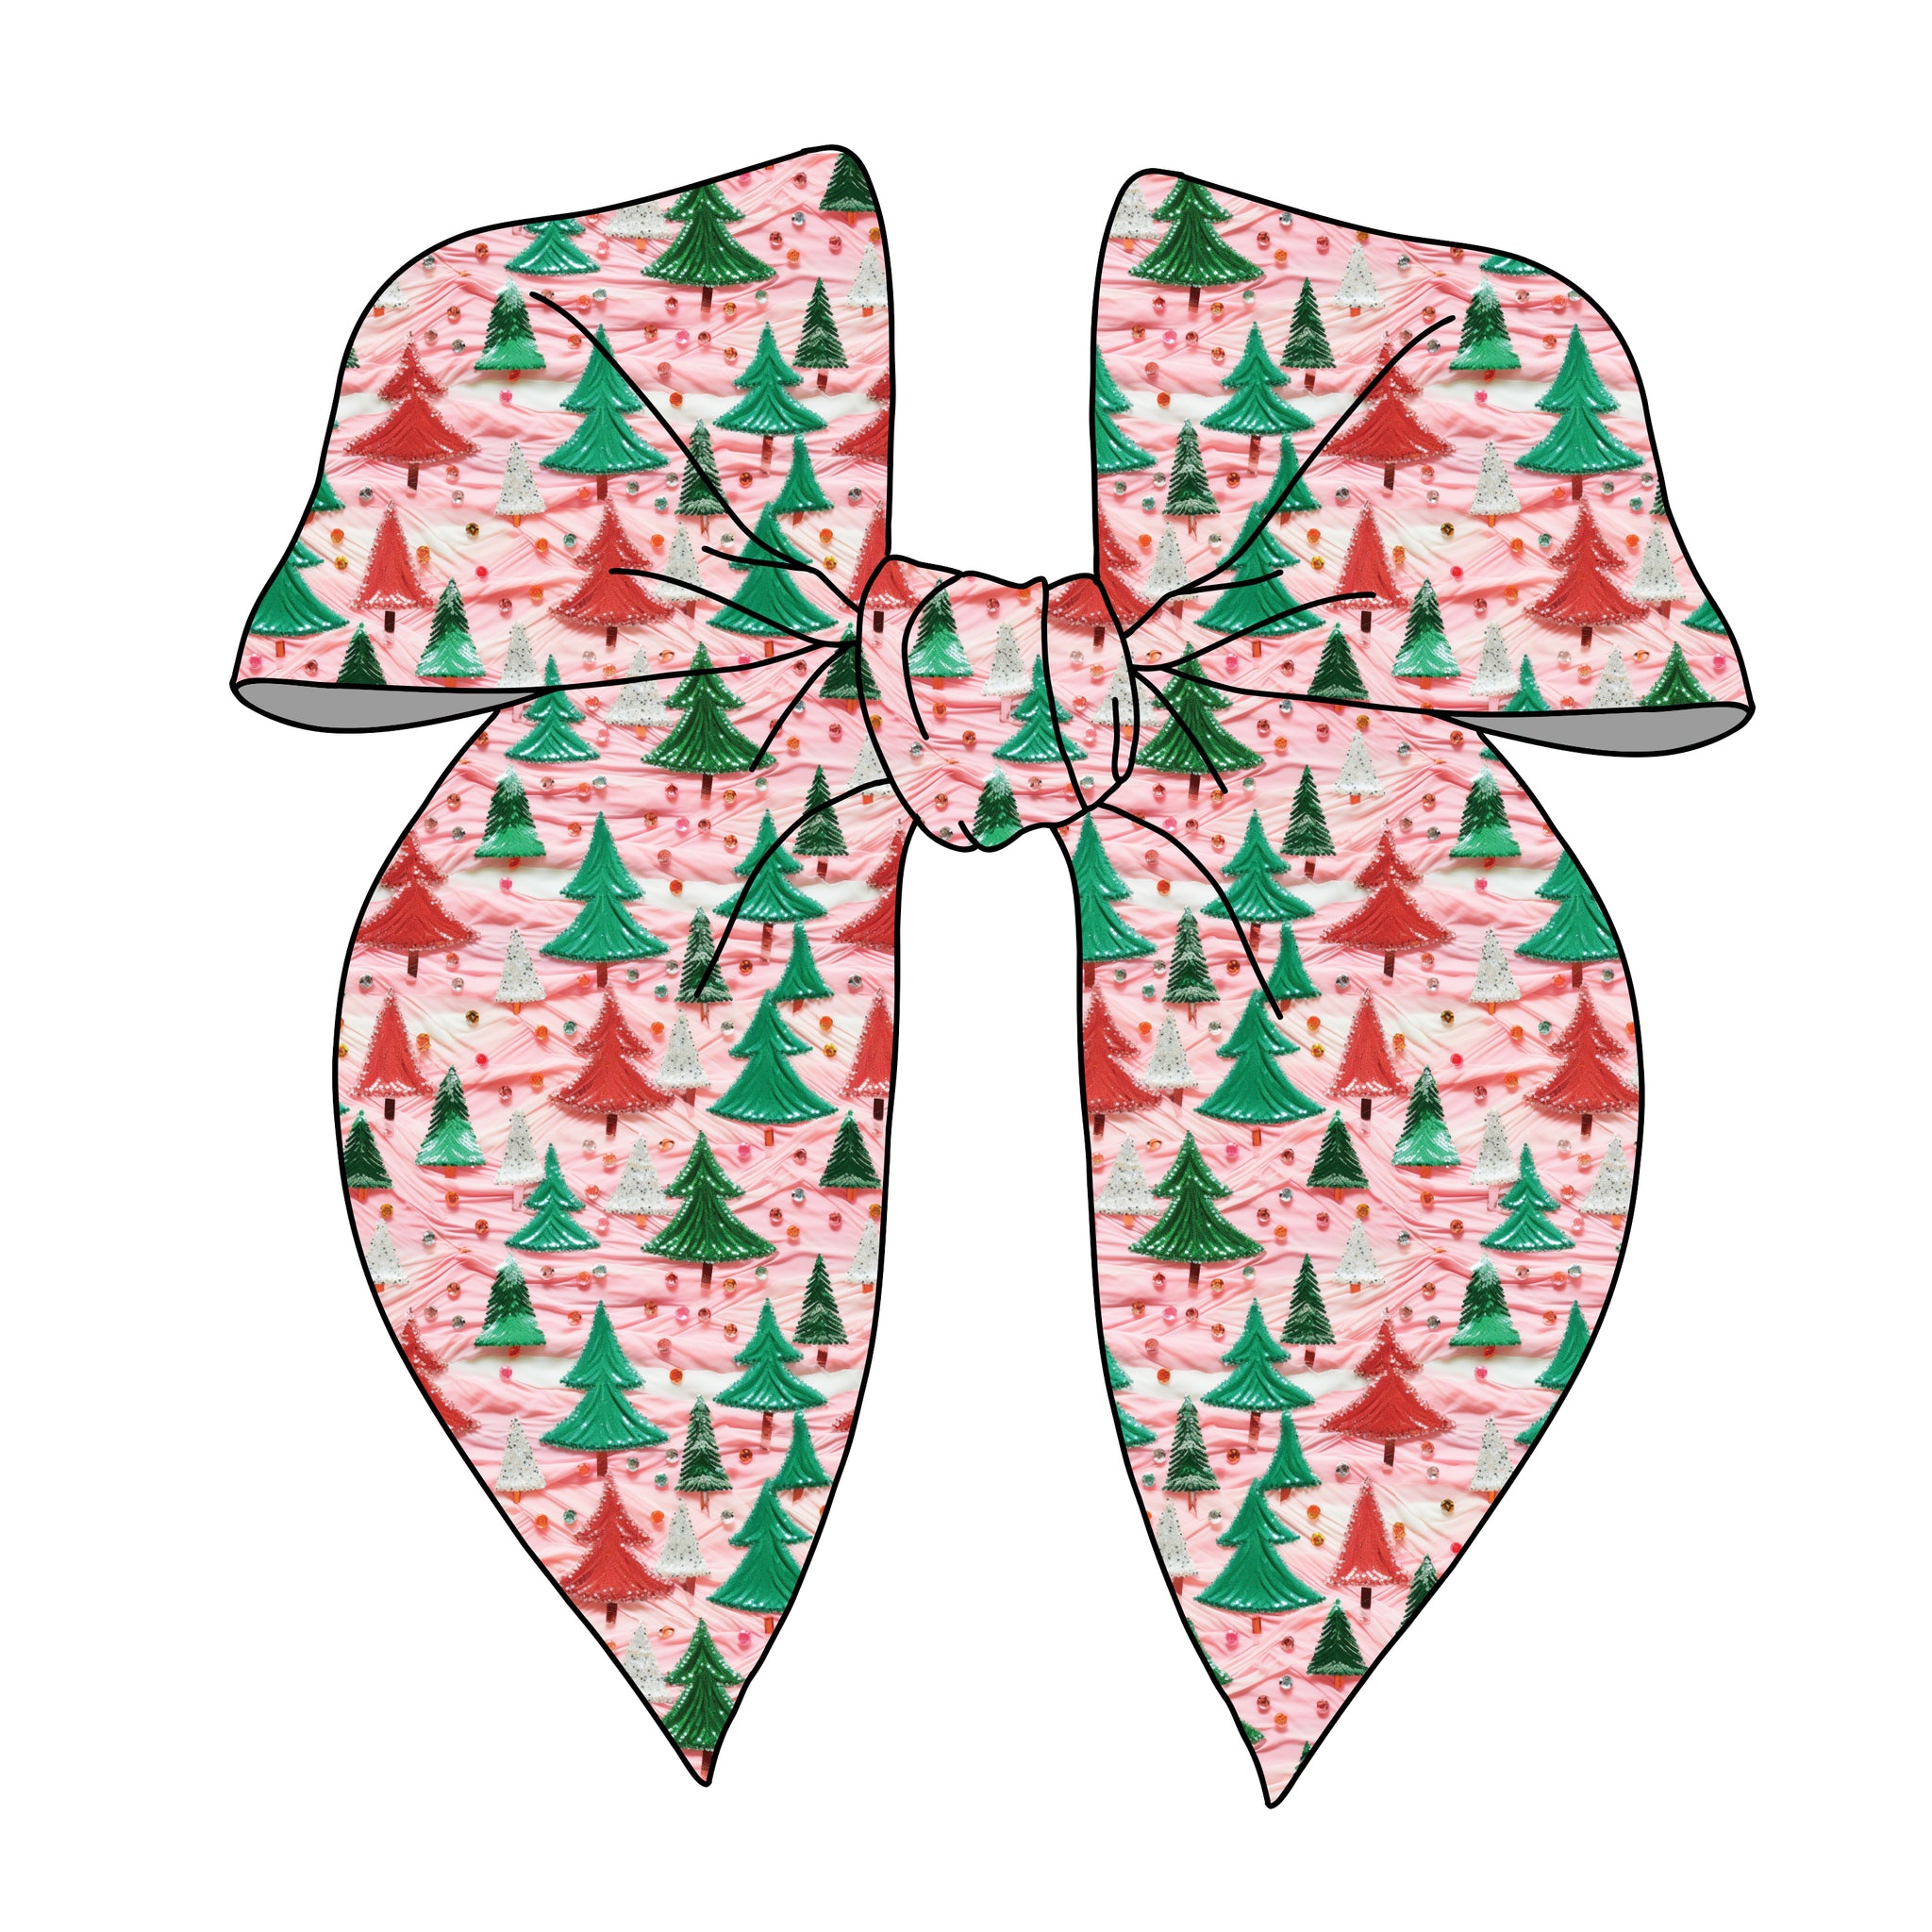 PRE-TIED SURGED EDGE BOW-"3D Embroidered" Pink and Green Sparkle Frosting Christmas Trees